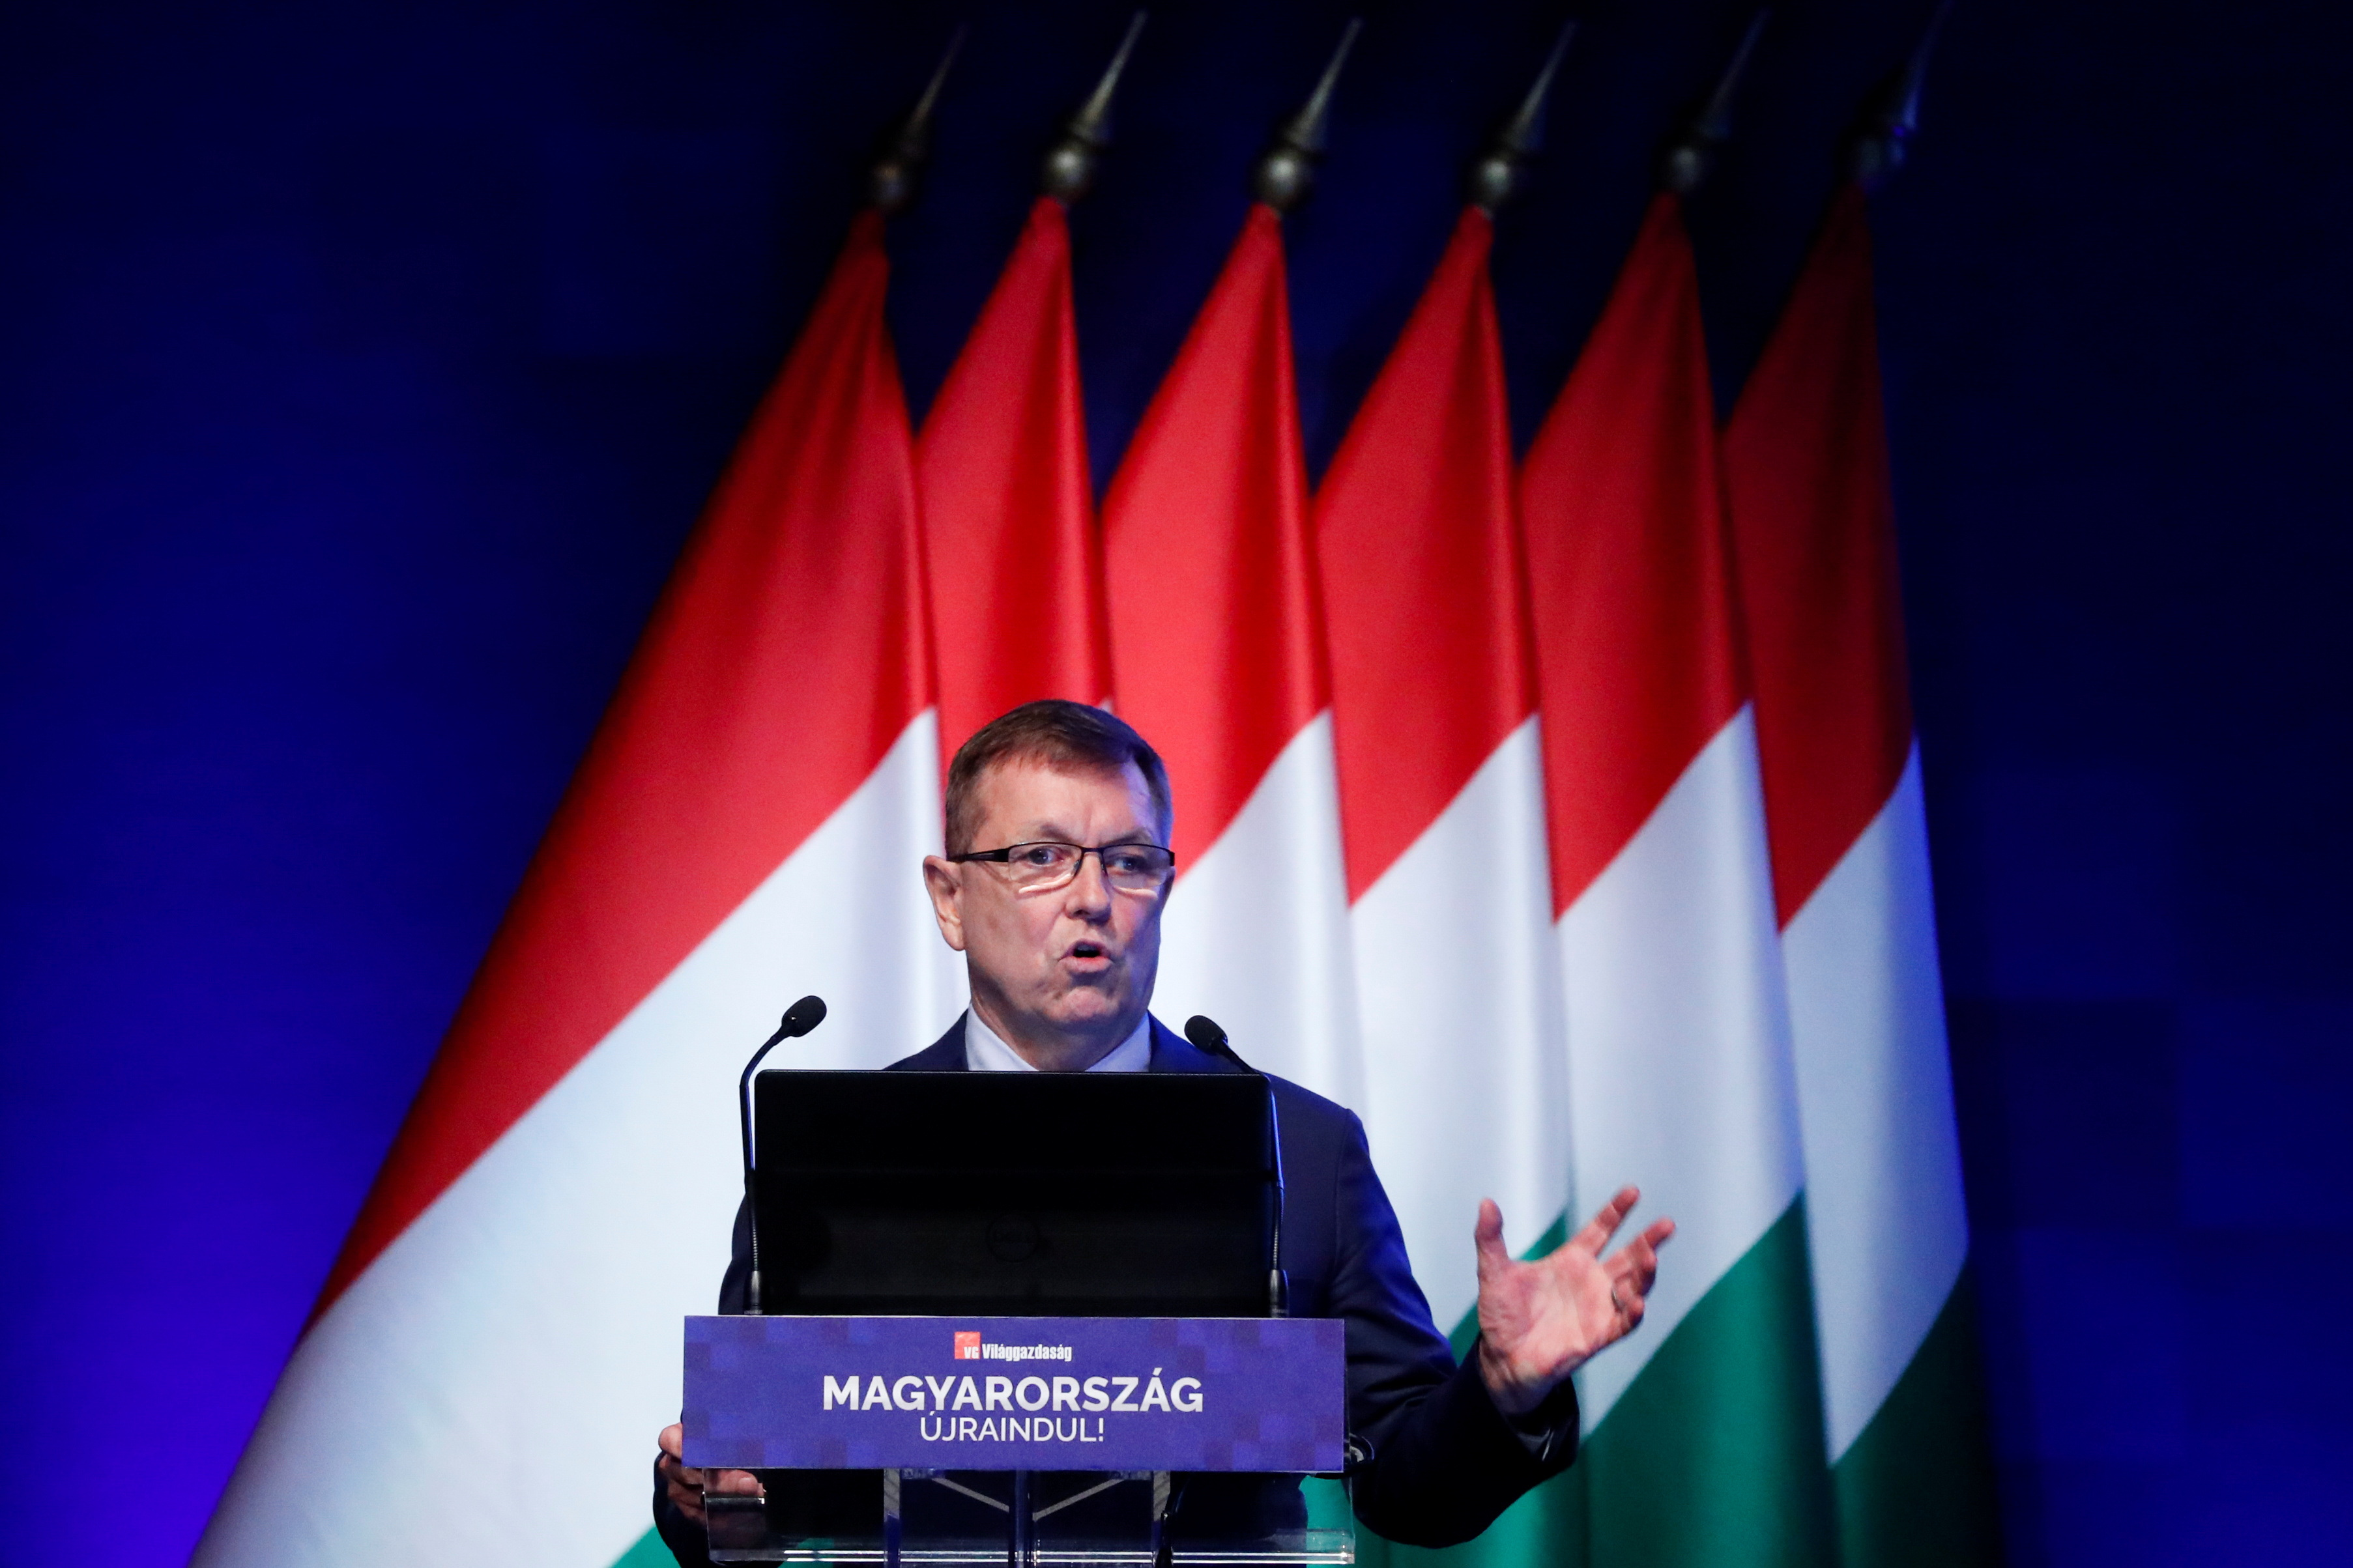 Hungarian Central Bank Governor Matolcsy attends a business conference in Budapest